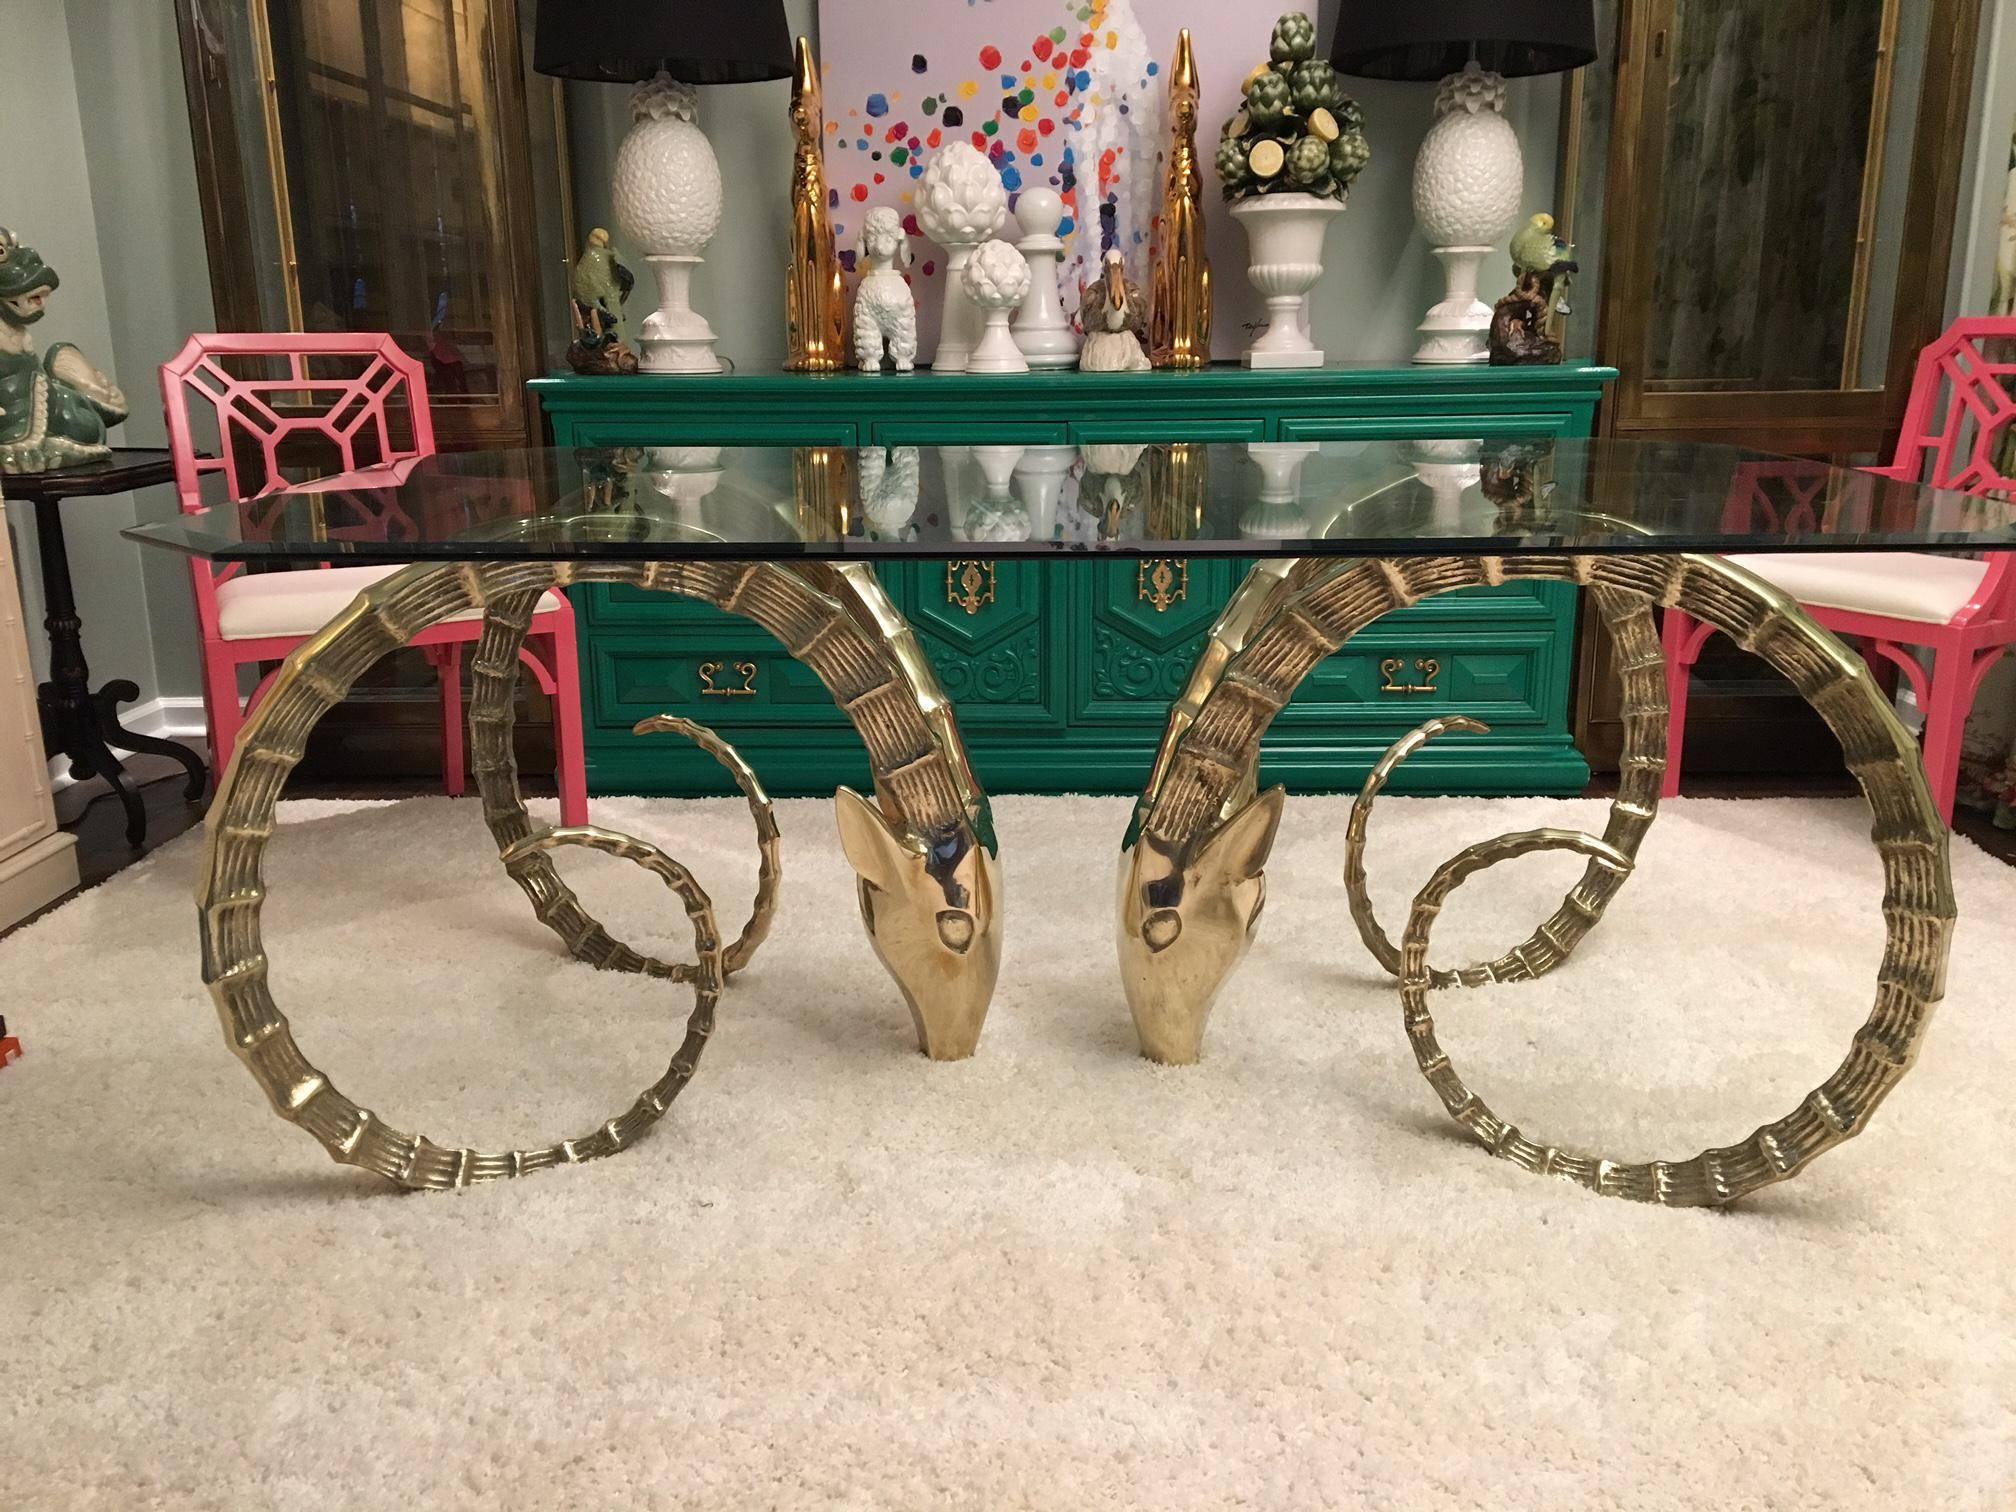 Monumental solid brass Ibex Rams head dining table with your choice of glass top. This Alain Chervet inspired iconic table will leave your friends and guests with no words.

Glass top (shown in first photo) measures 90